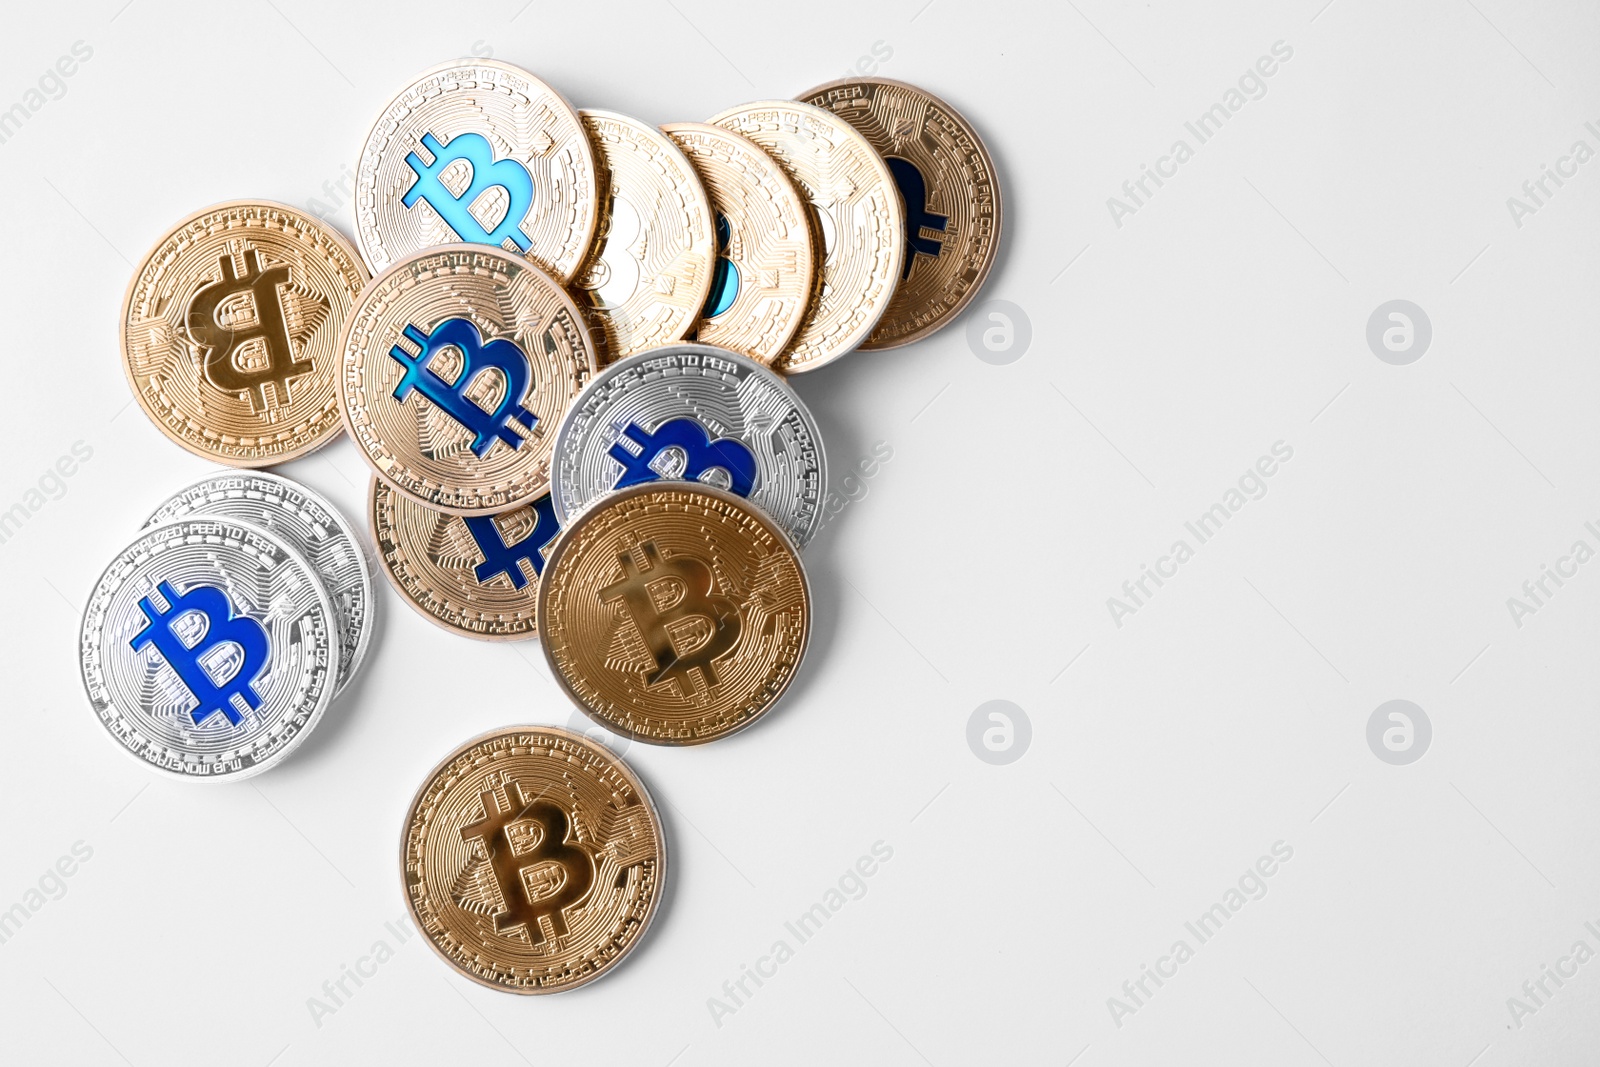 Photo of Golden and silver bitcoins on white background, top view